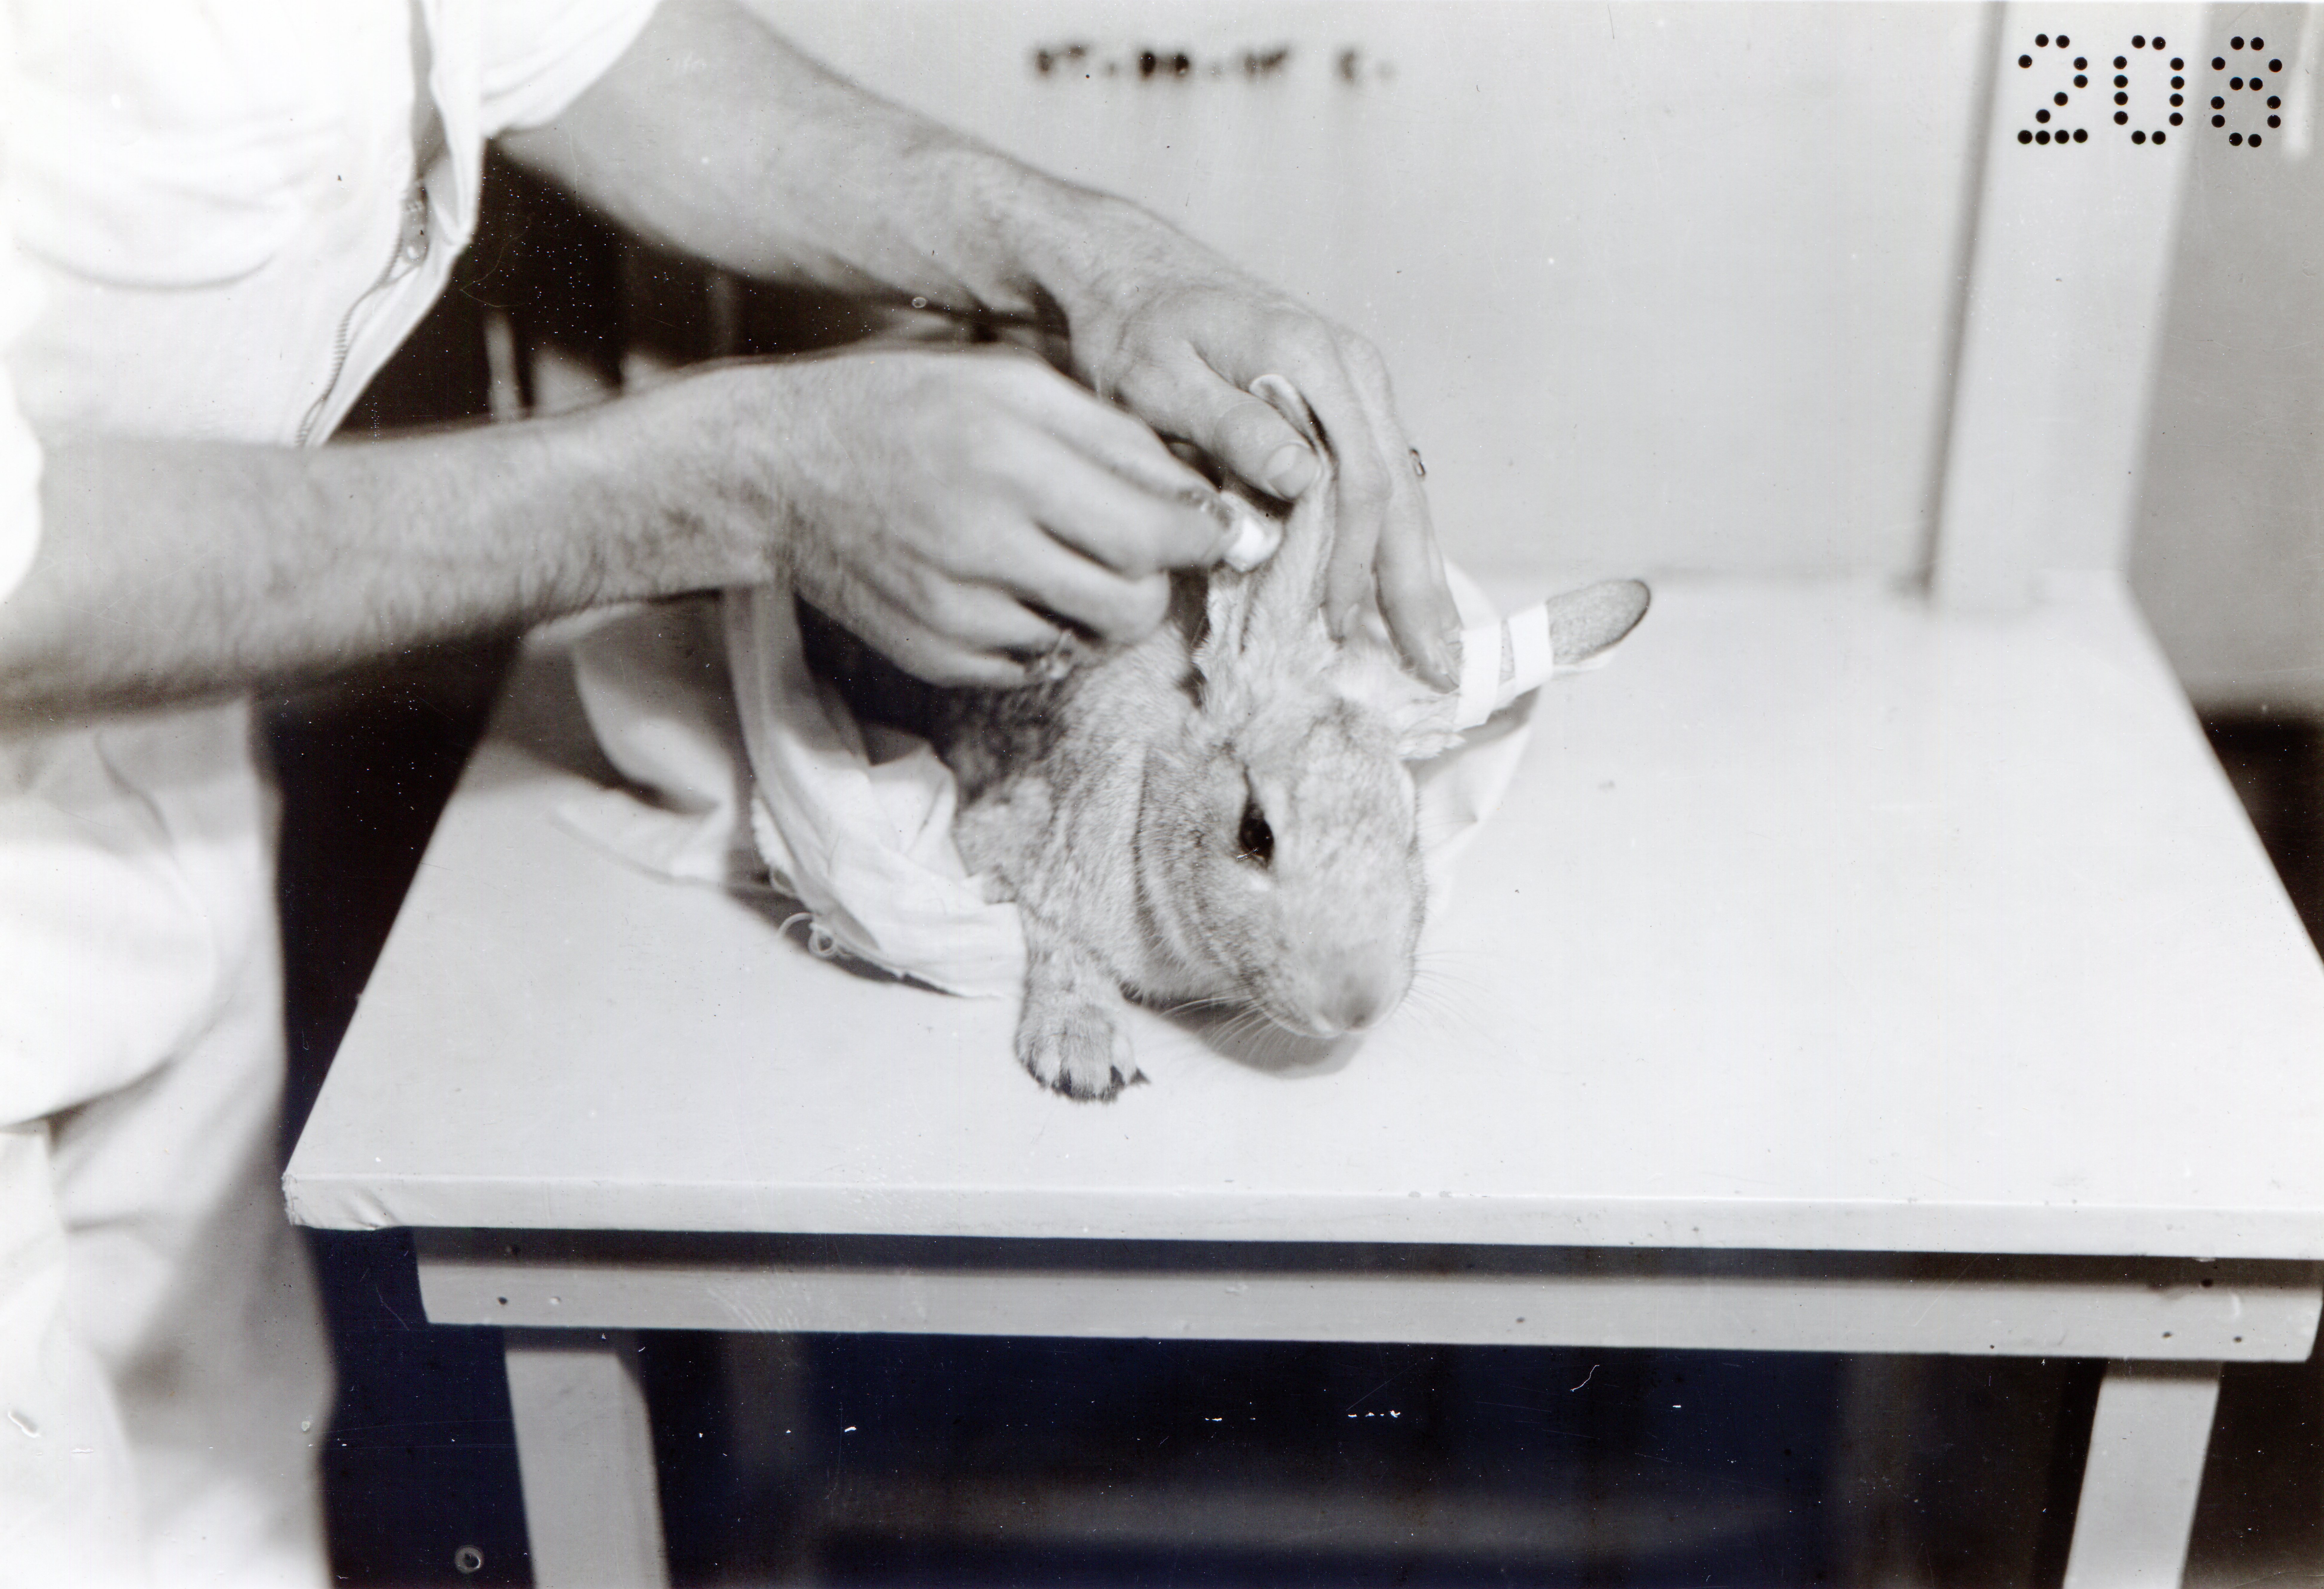 A rabbit is being wrapped in white clothe on table